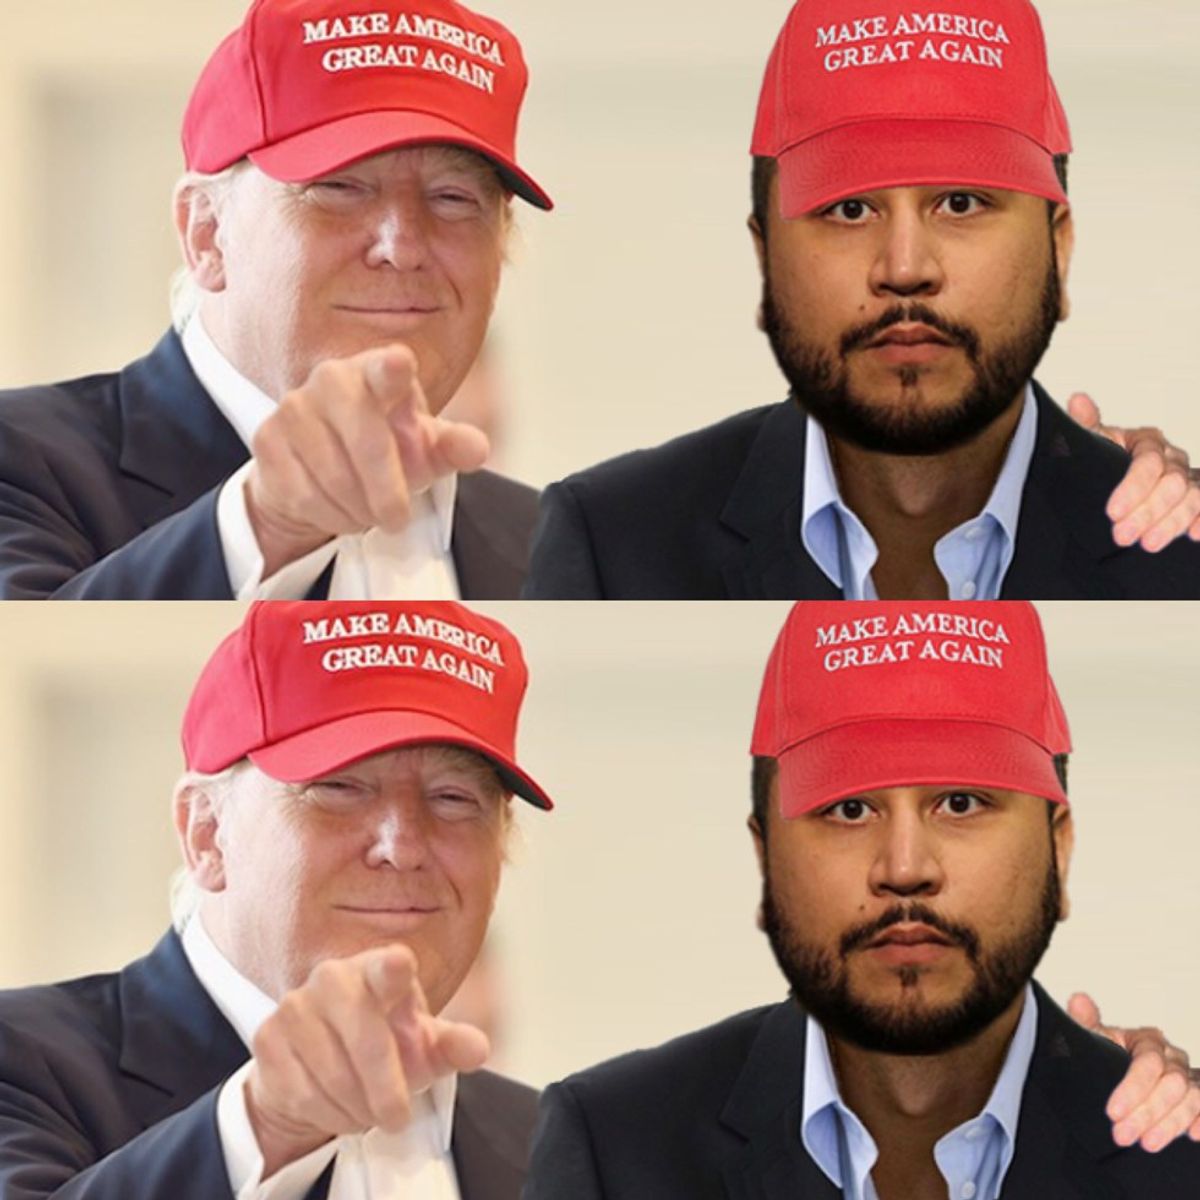 George Zimmerman, The Face Of Trump Supporters?